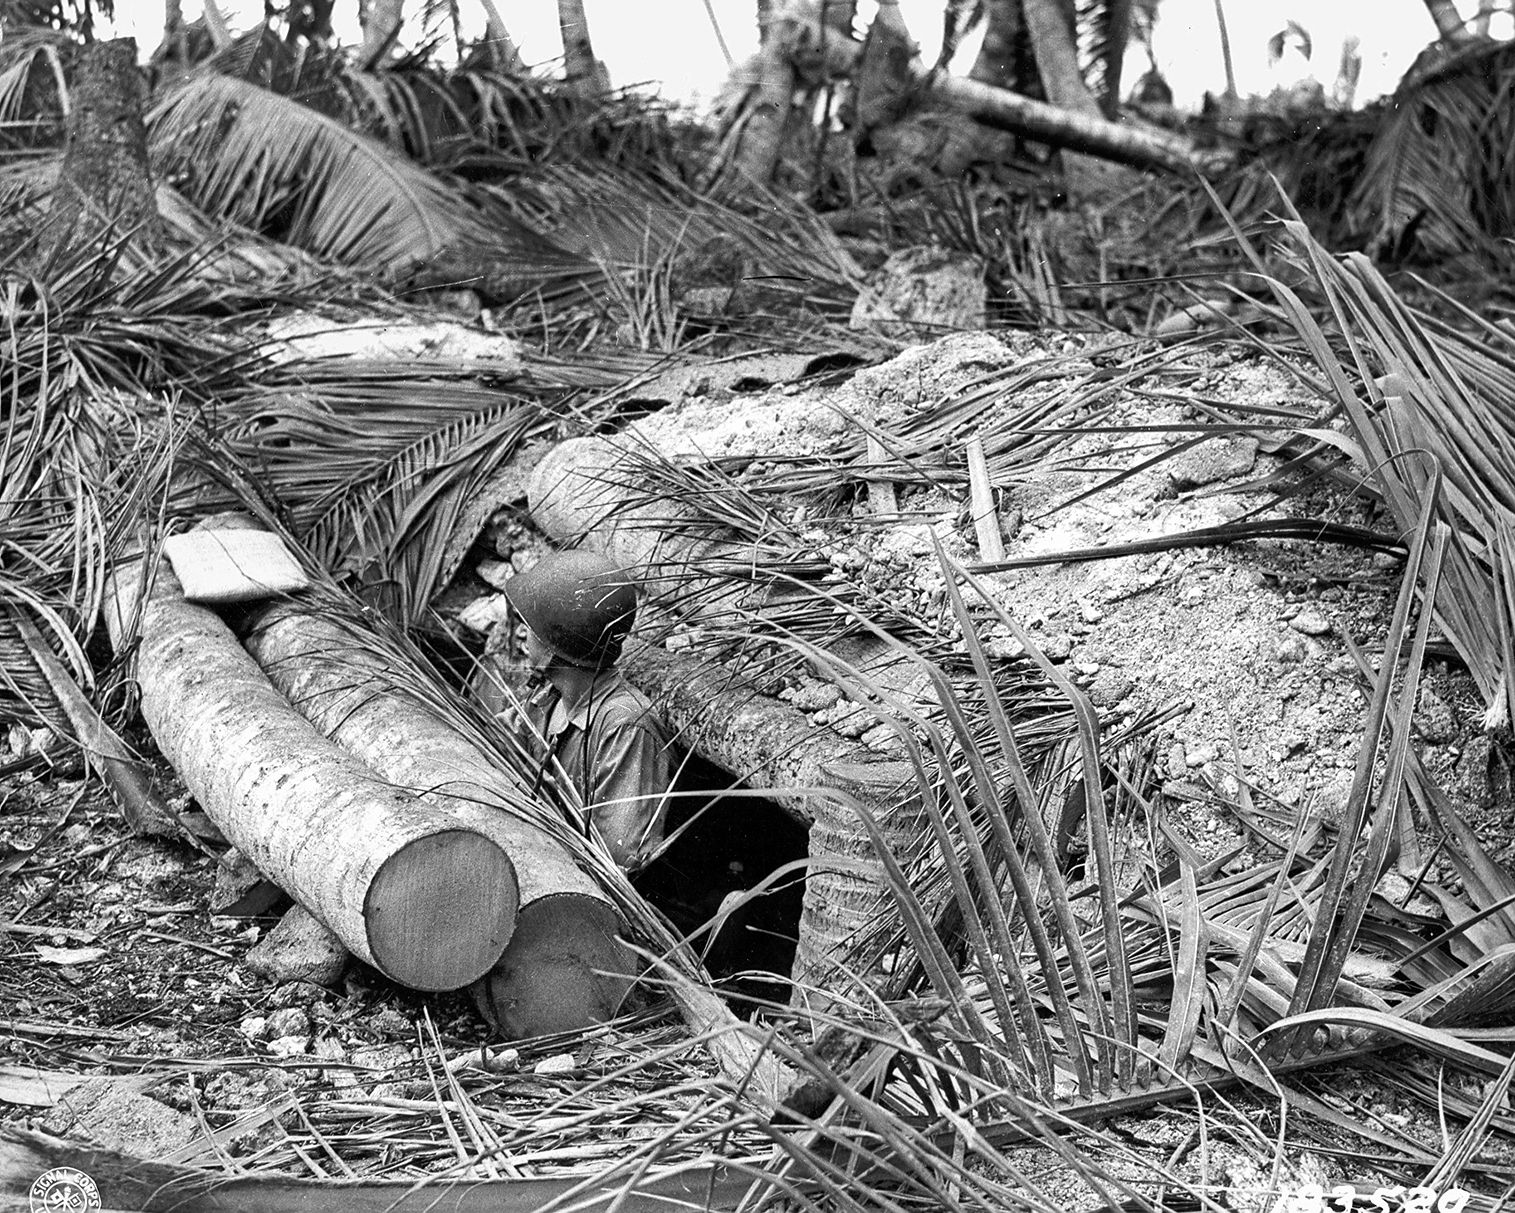 An American soldier peers from a reinforced bunker recently occupied by the Japanese at Makin in the Gilbert Islands. Makin was captured after landings on November 20, 1943, during Operation Galvanic. 